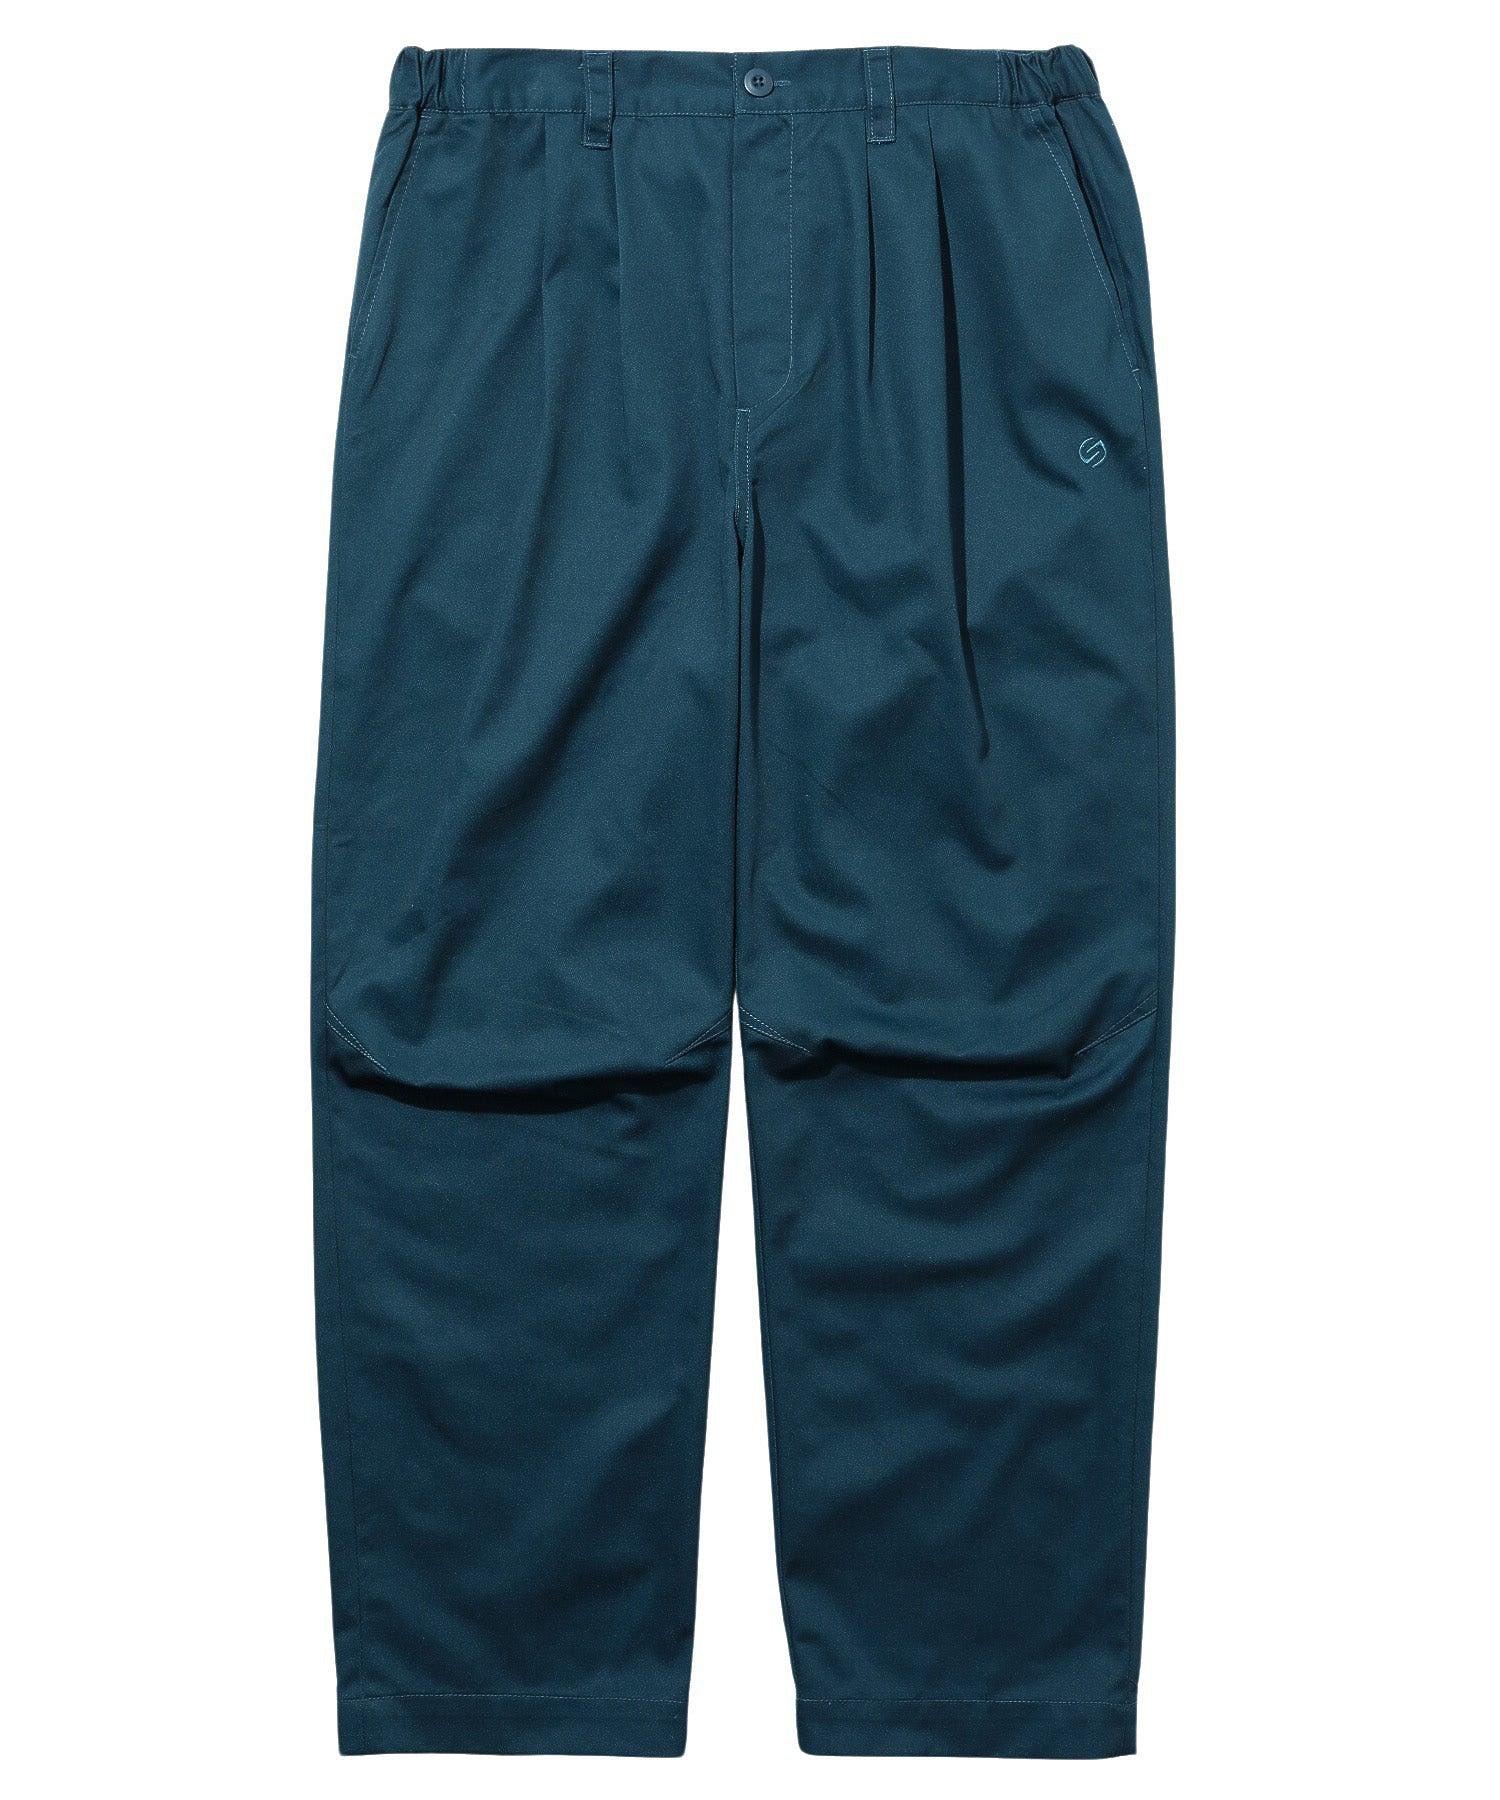 TWO TUCK WORK PANTS SILAS